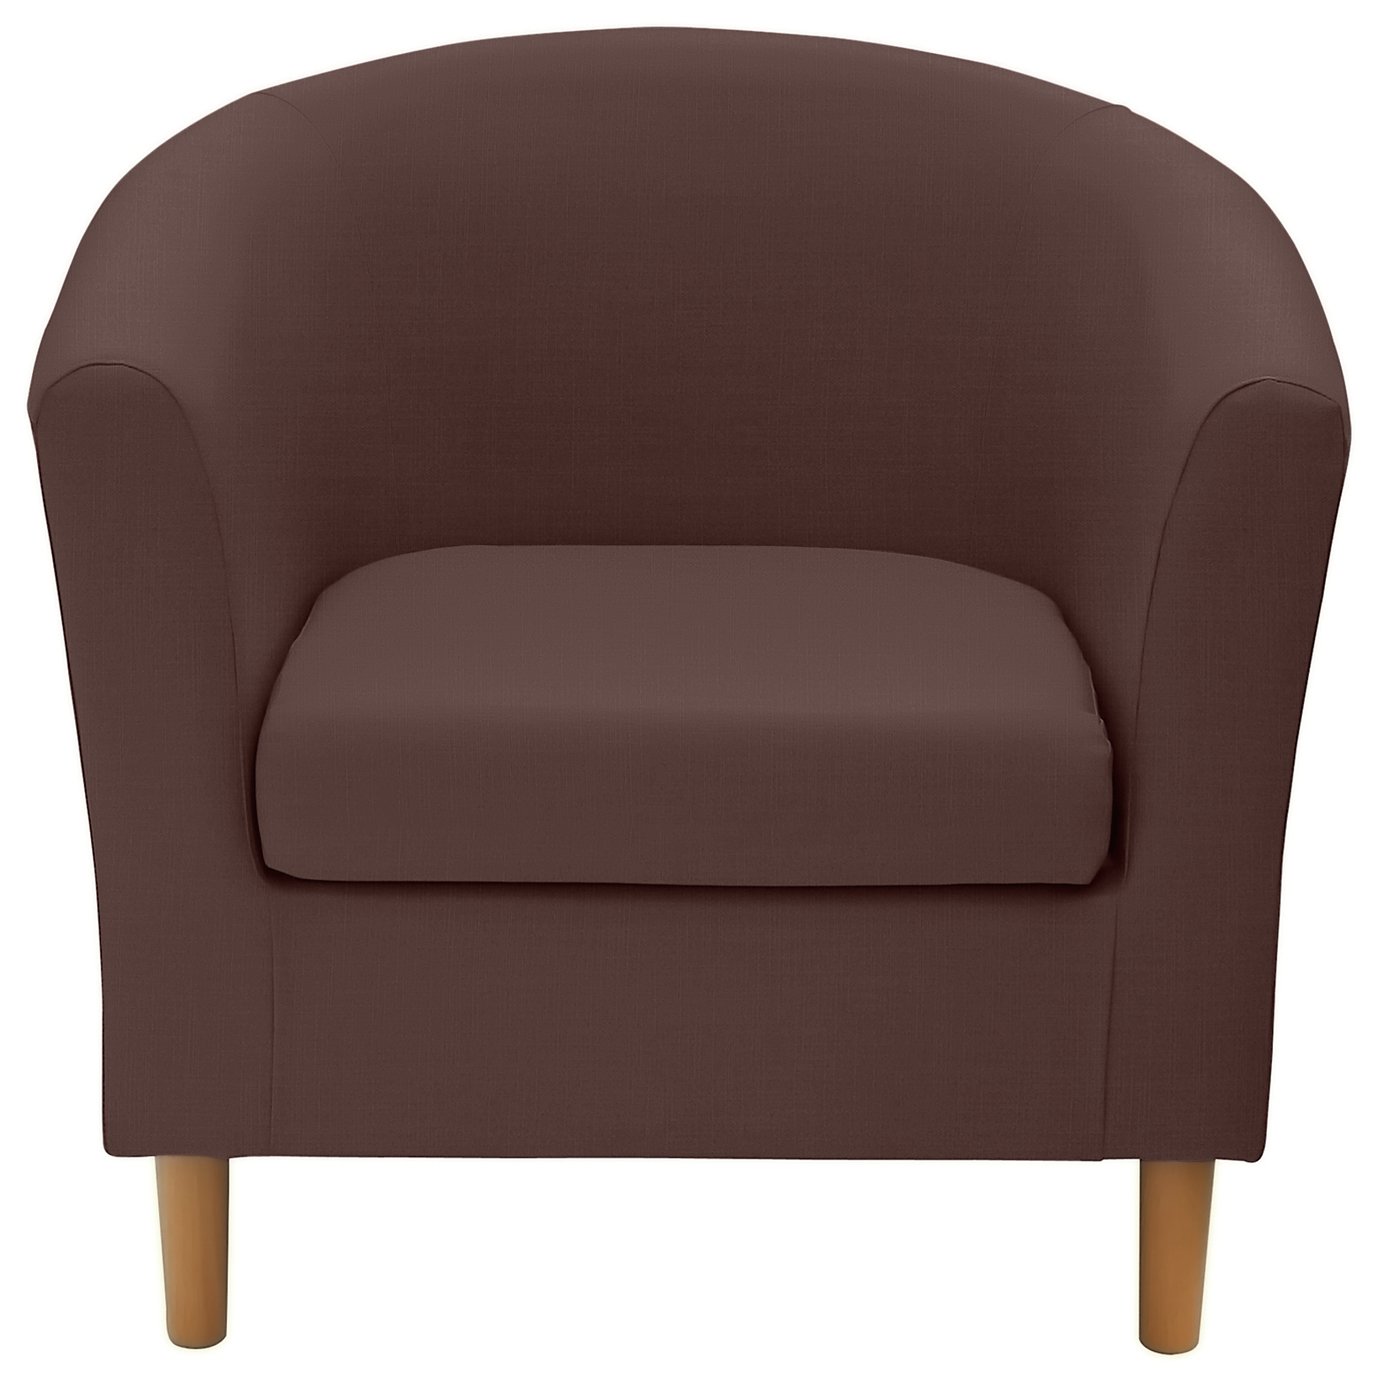 Buy HOME Fabric Tub Chair - Brown at Argos.co.uk - Your Online Shop for